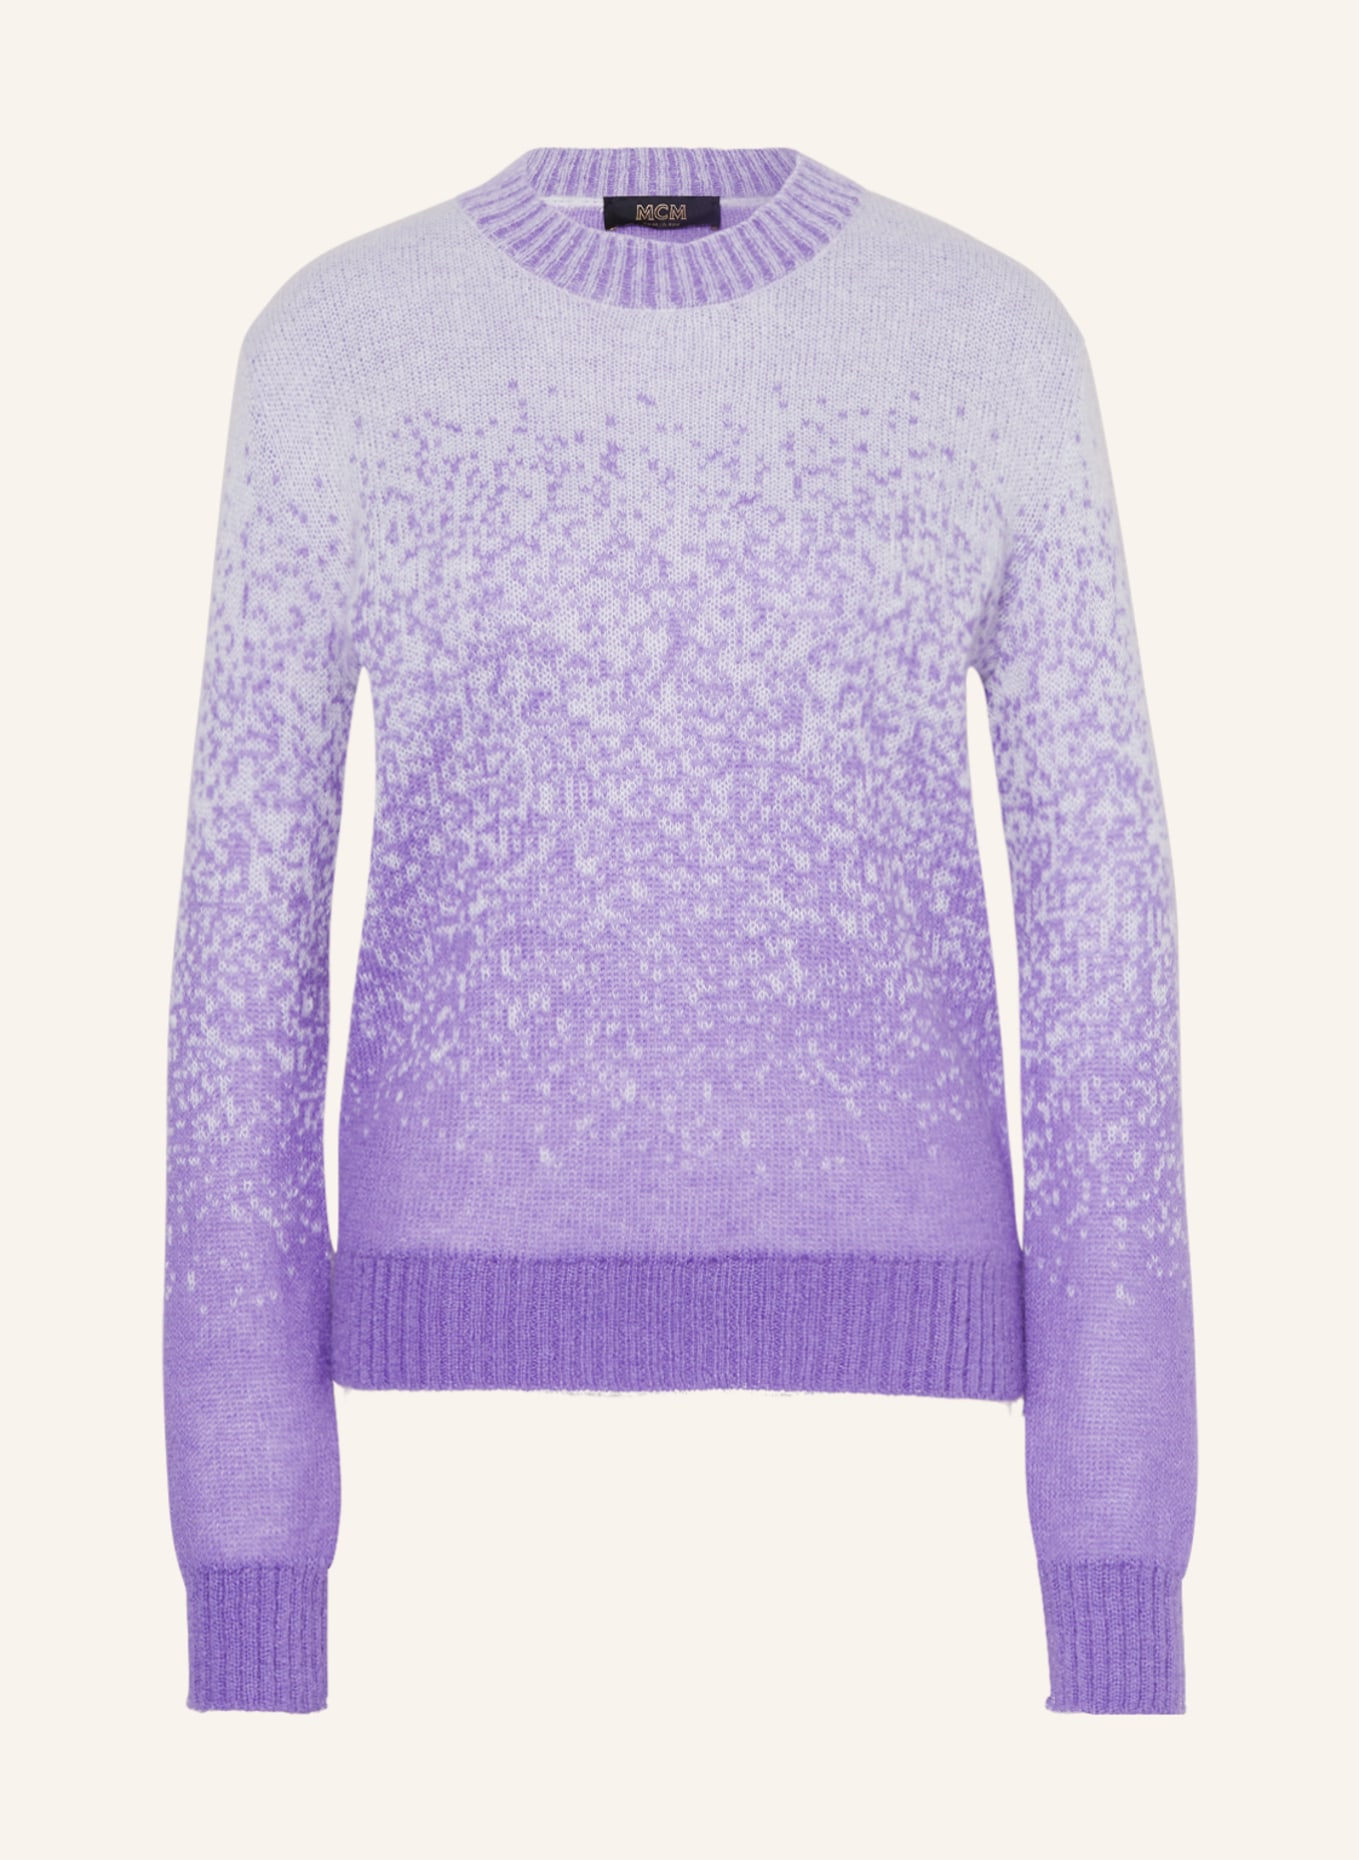 MCM Pullover mit Mohair, Farbe: WEISS/ LILA (Bild 1)